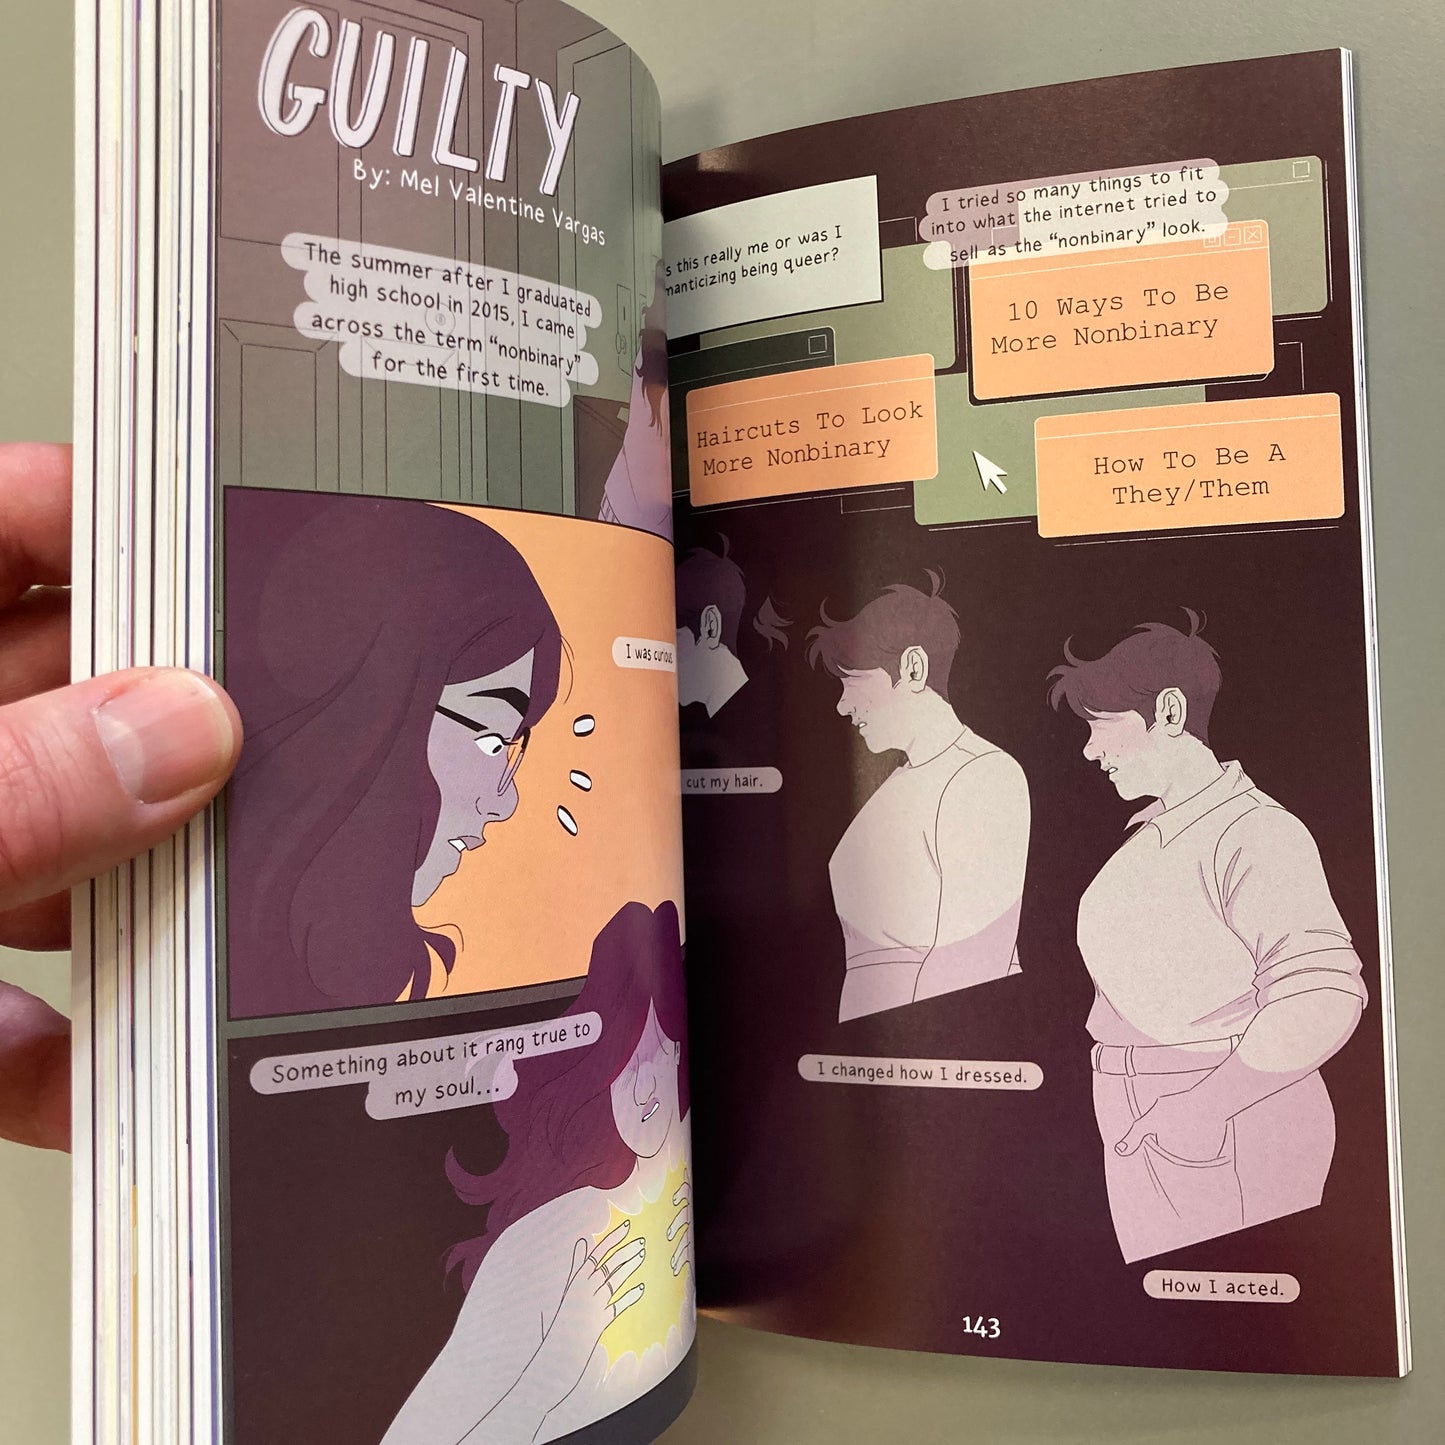 The Out Side: Trans & Nonbinary Comics